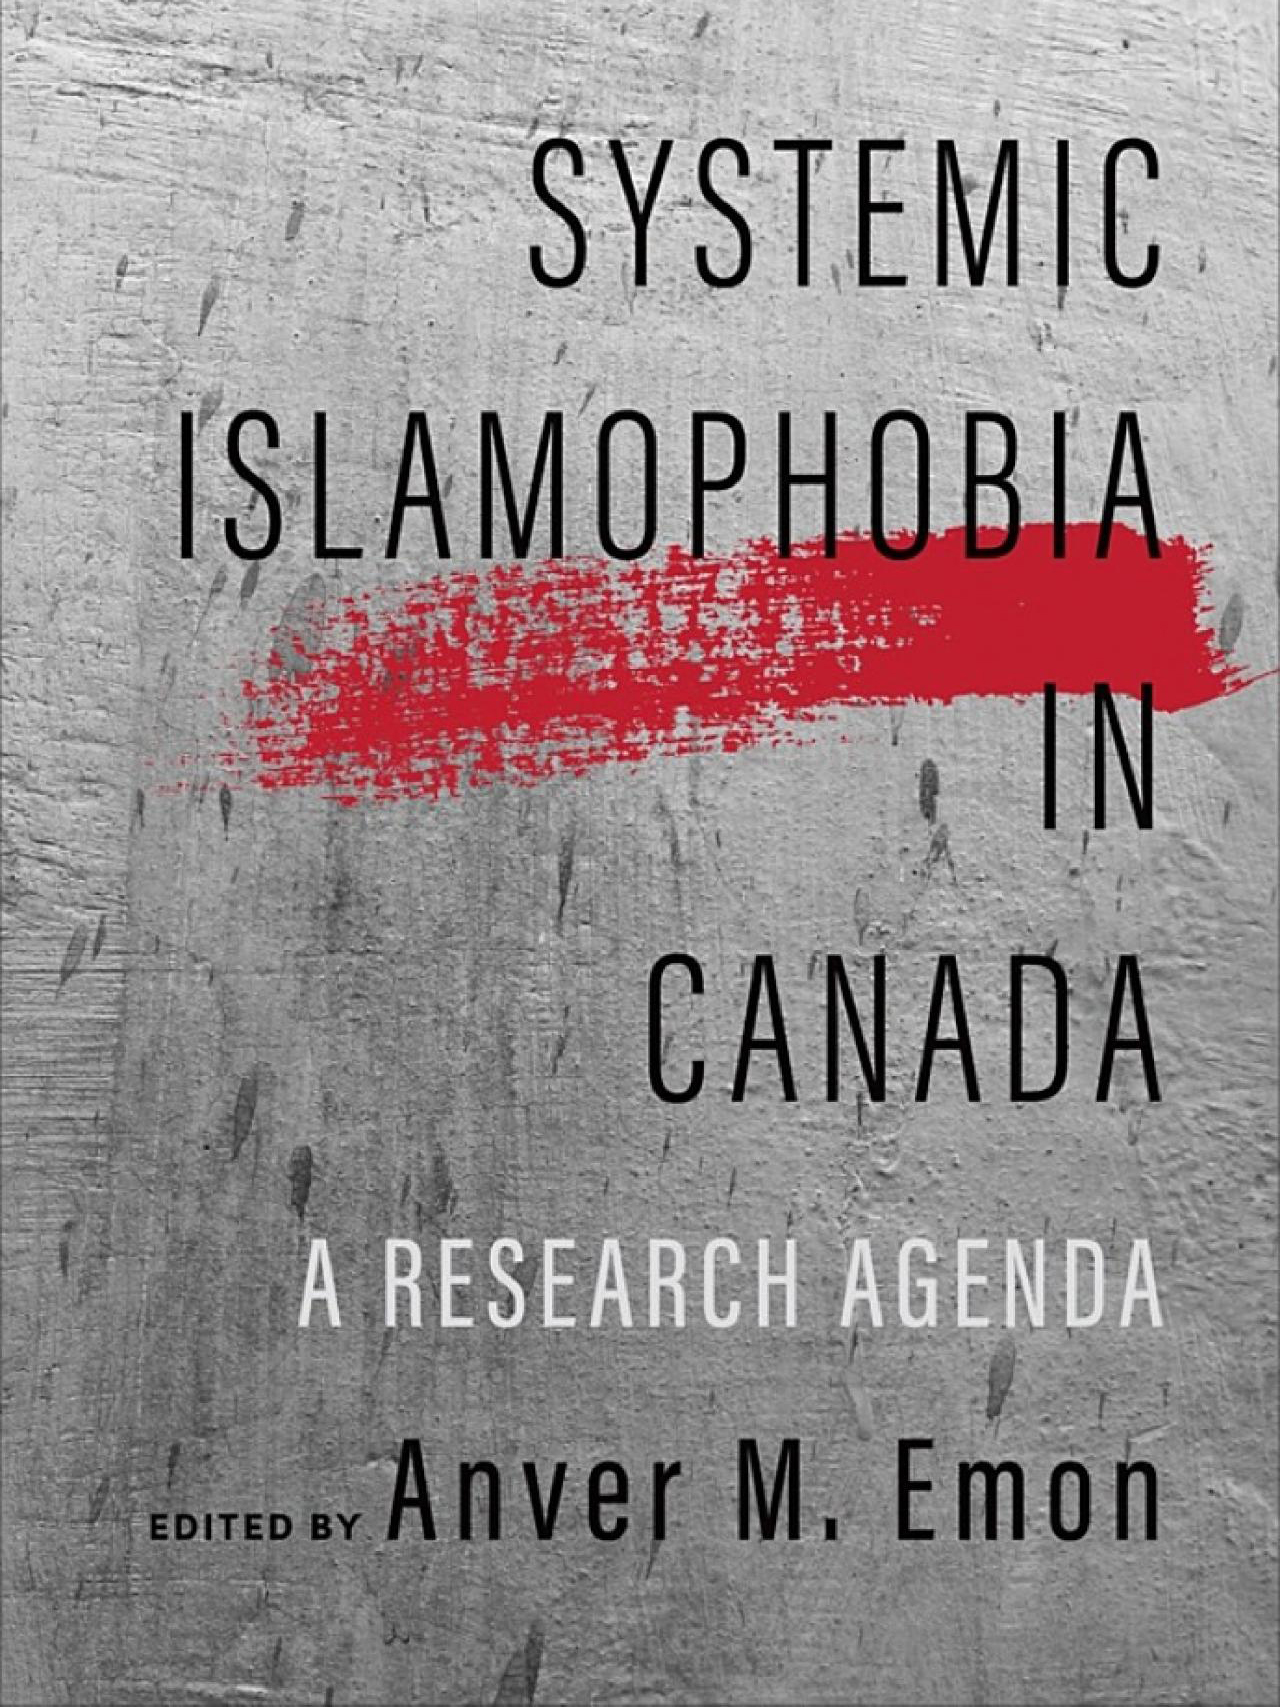 Cover of book, Systemic Islamophobia in Canada